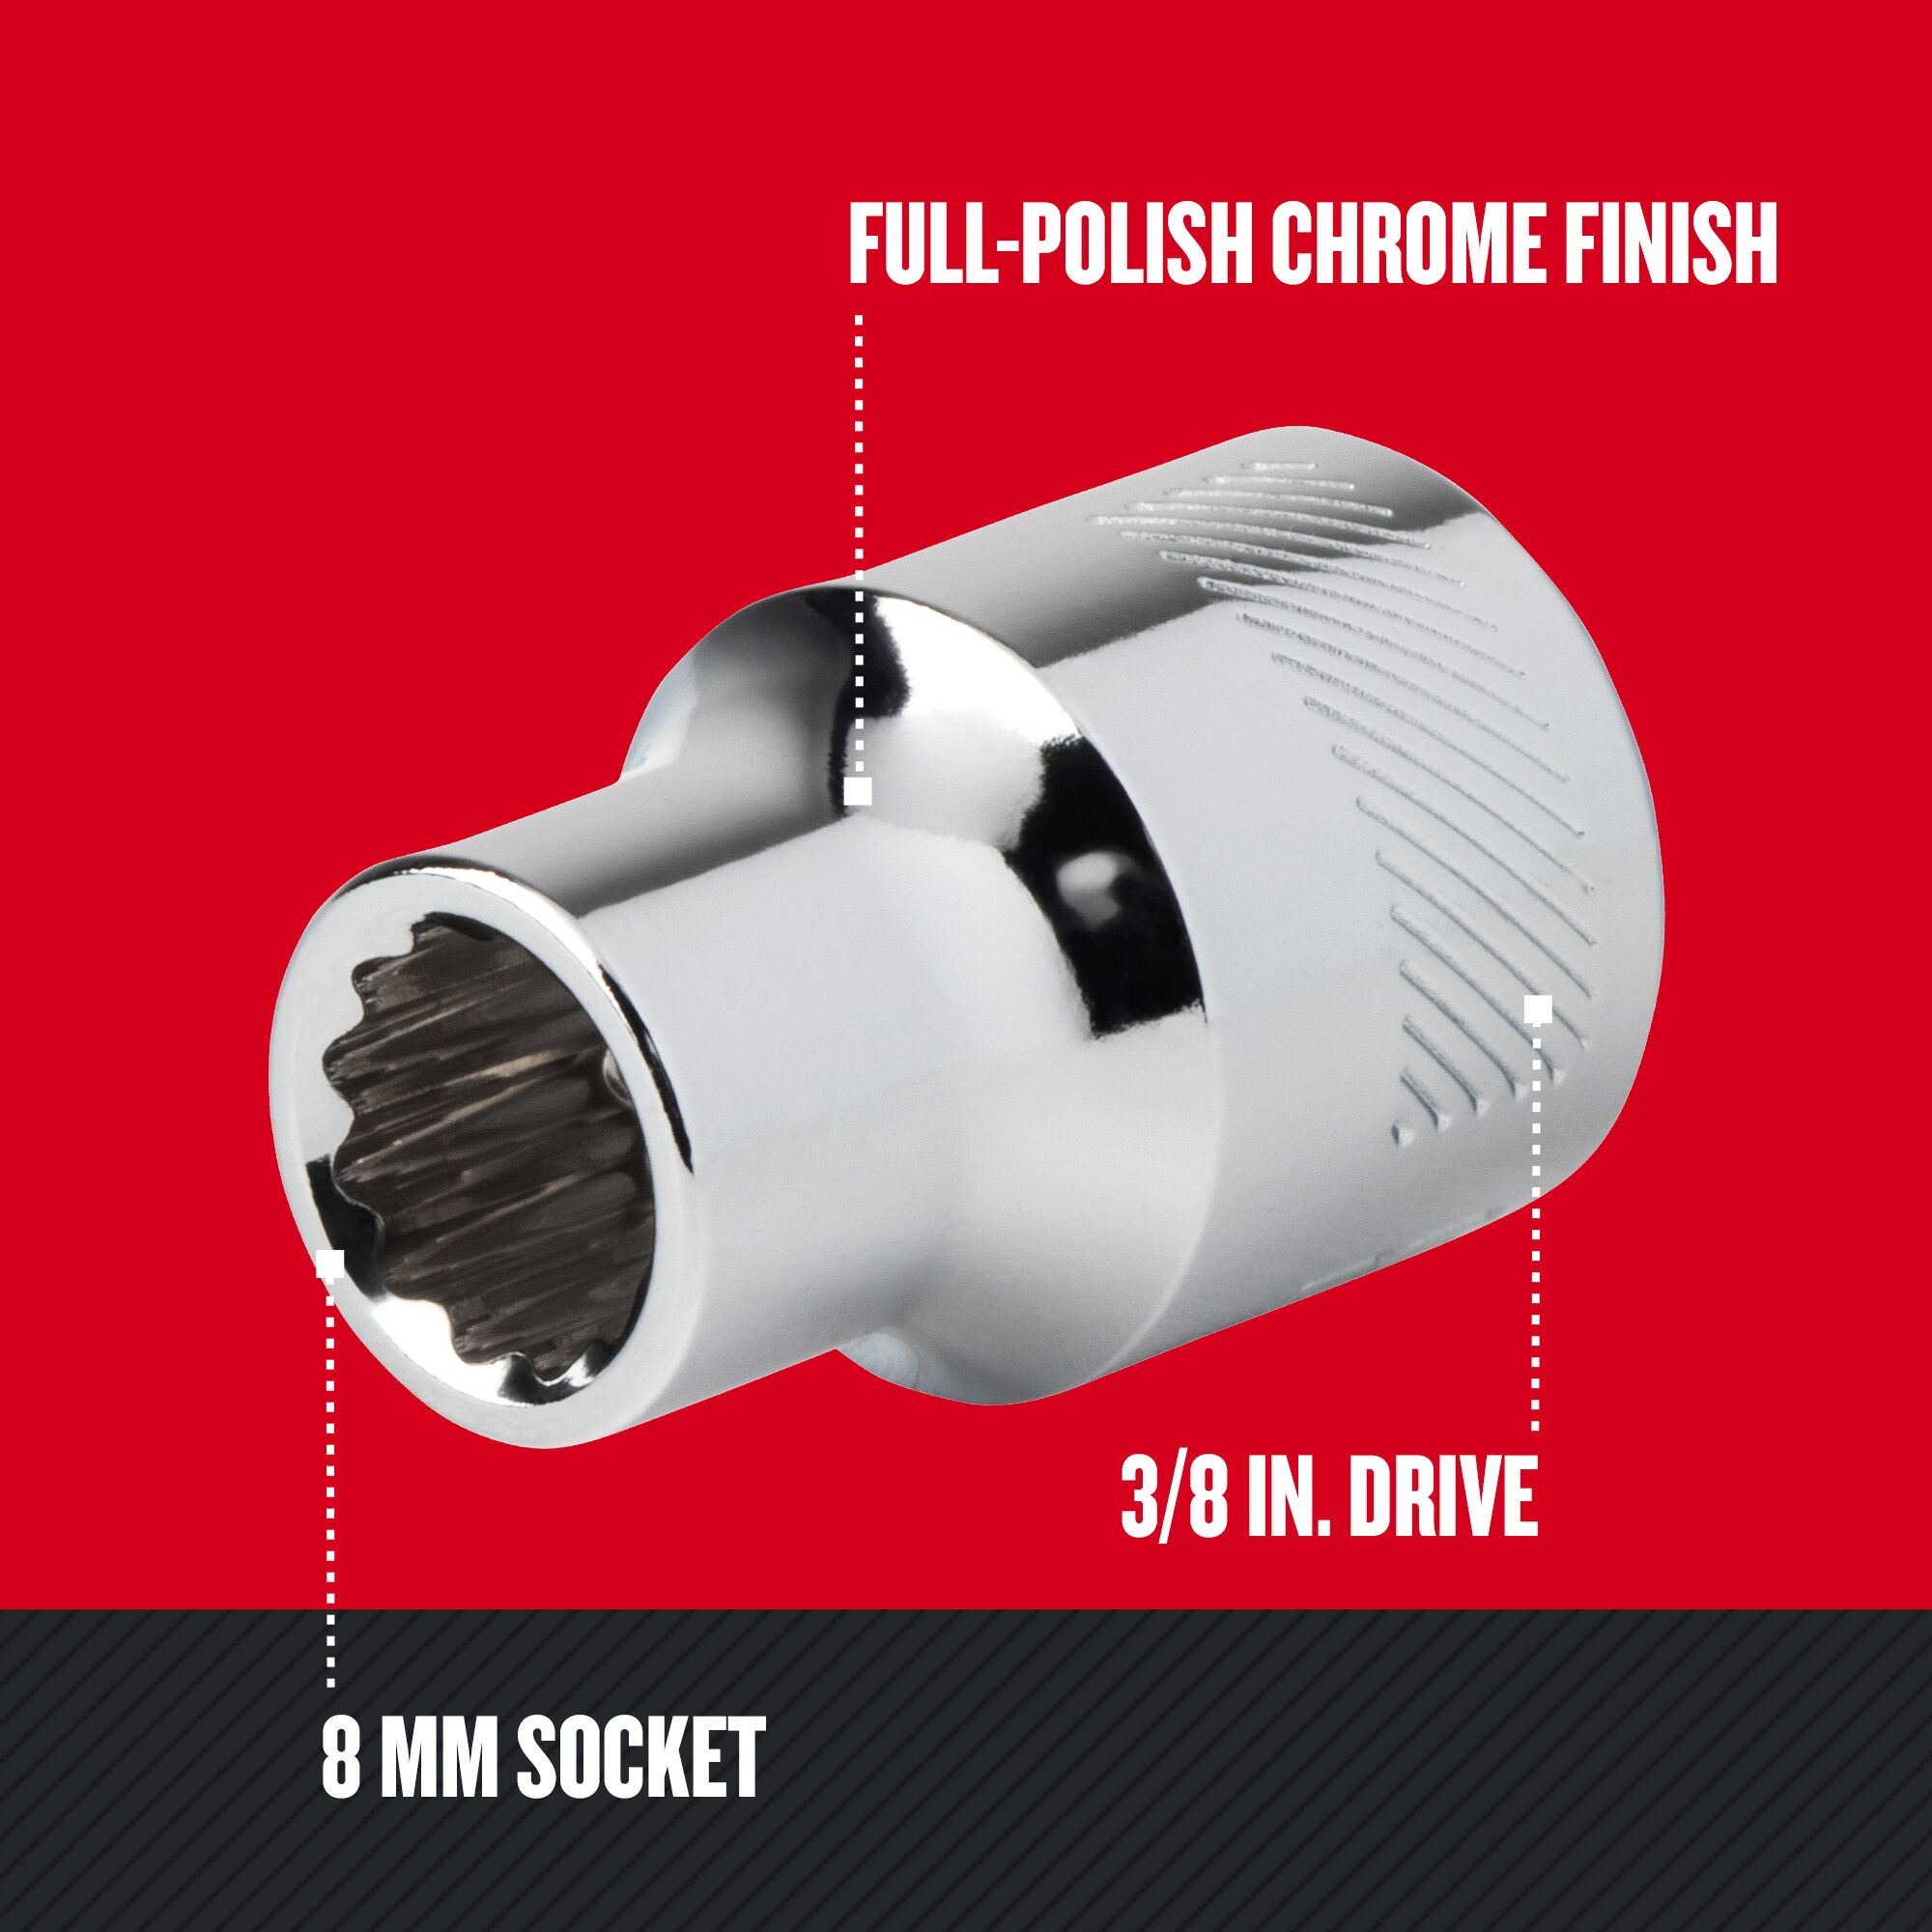 Graphic of CRAFTSMAN Sockets: 12-Point highlighting product features